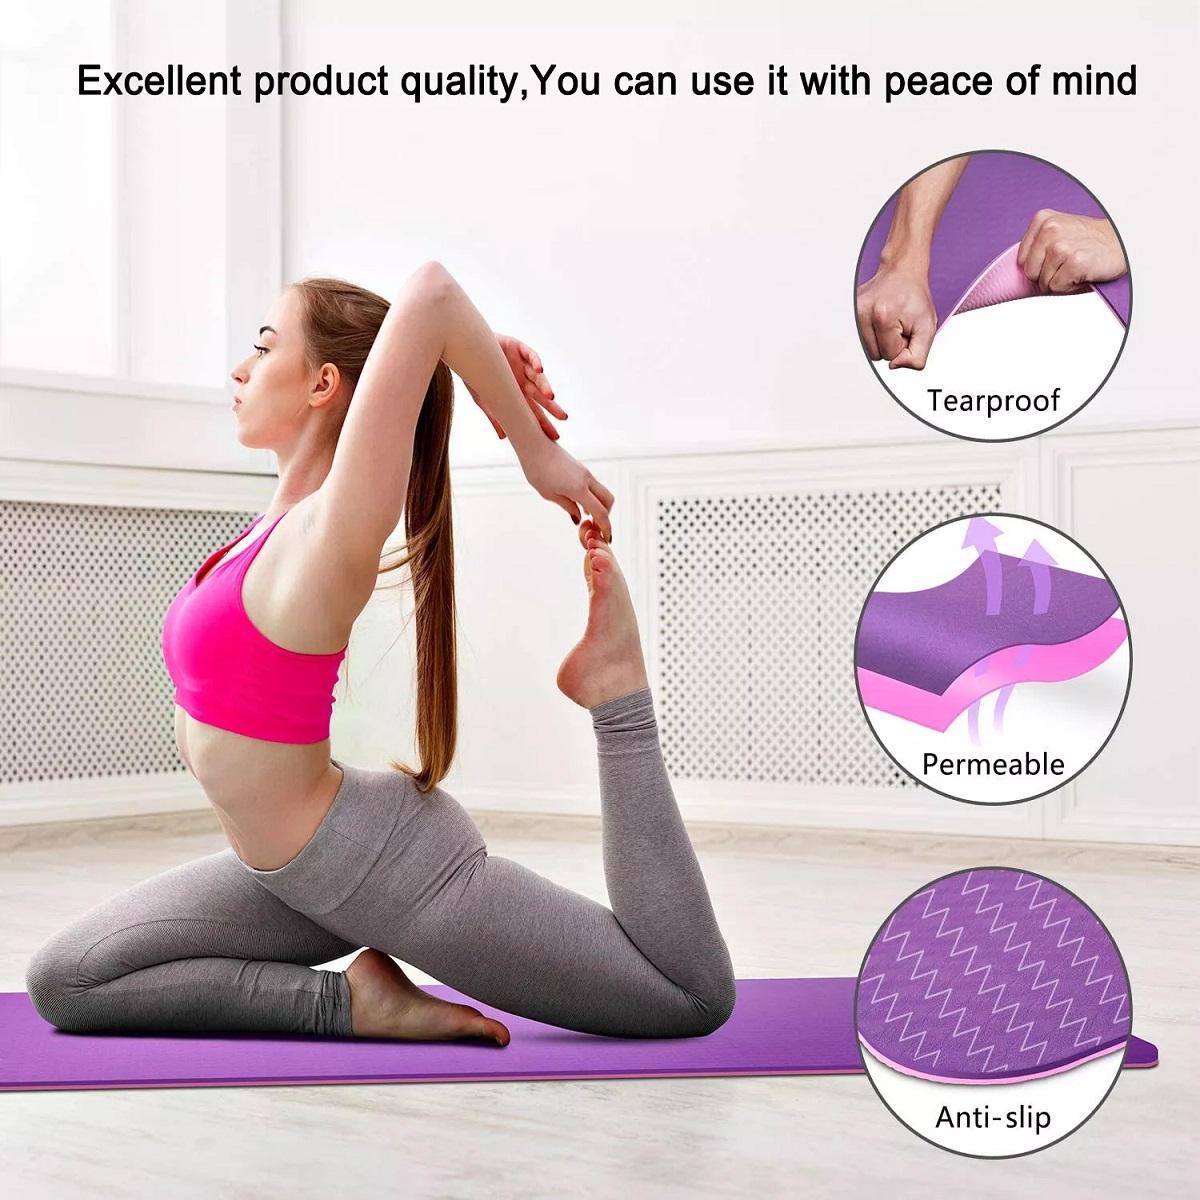 portable yoga mat, exercise mat, fitness mat, 72 x 24 x 1/2 inch thick, purple